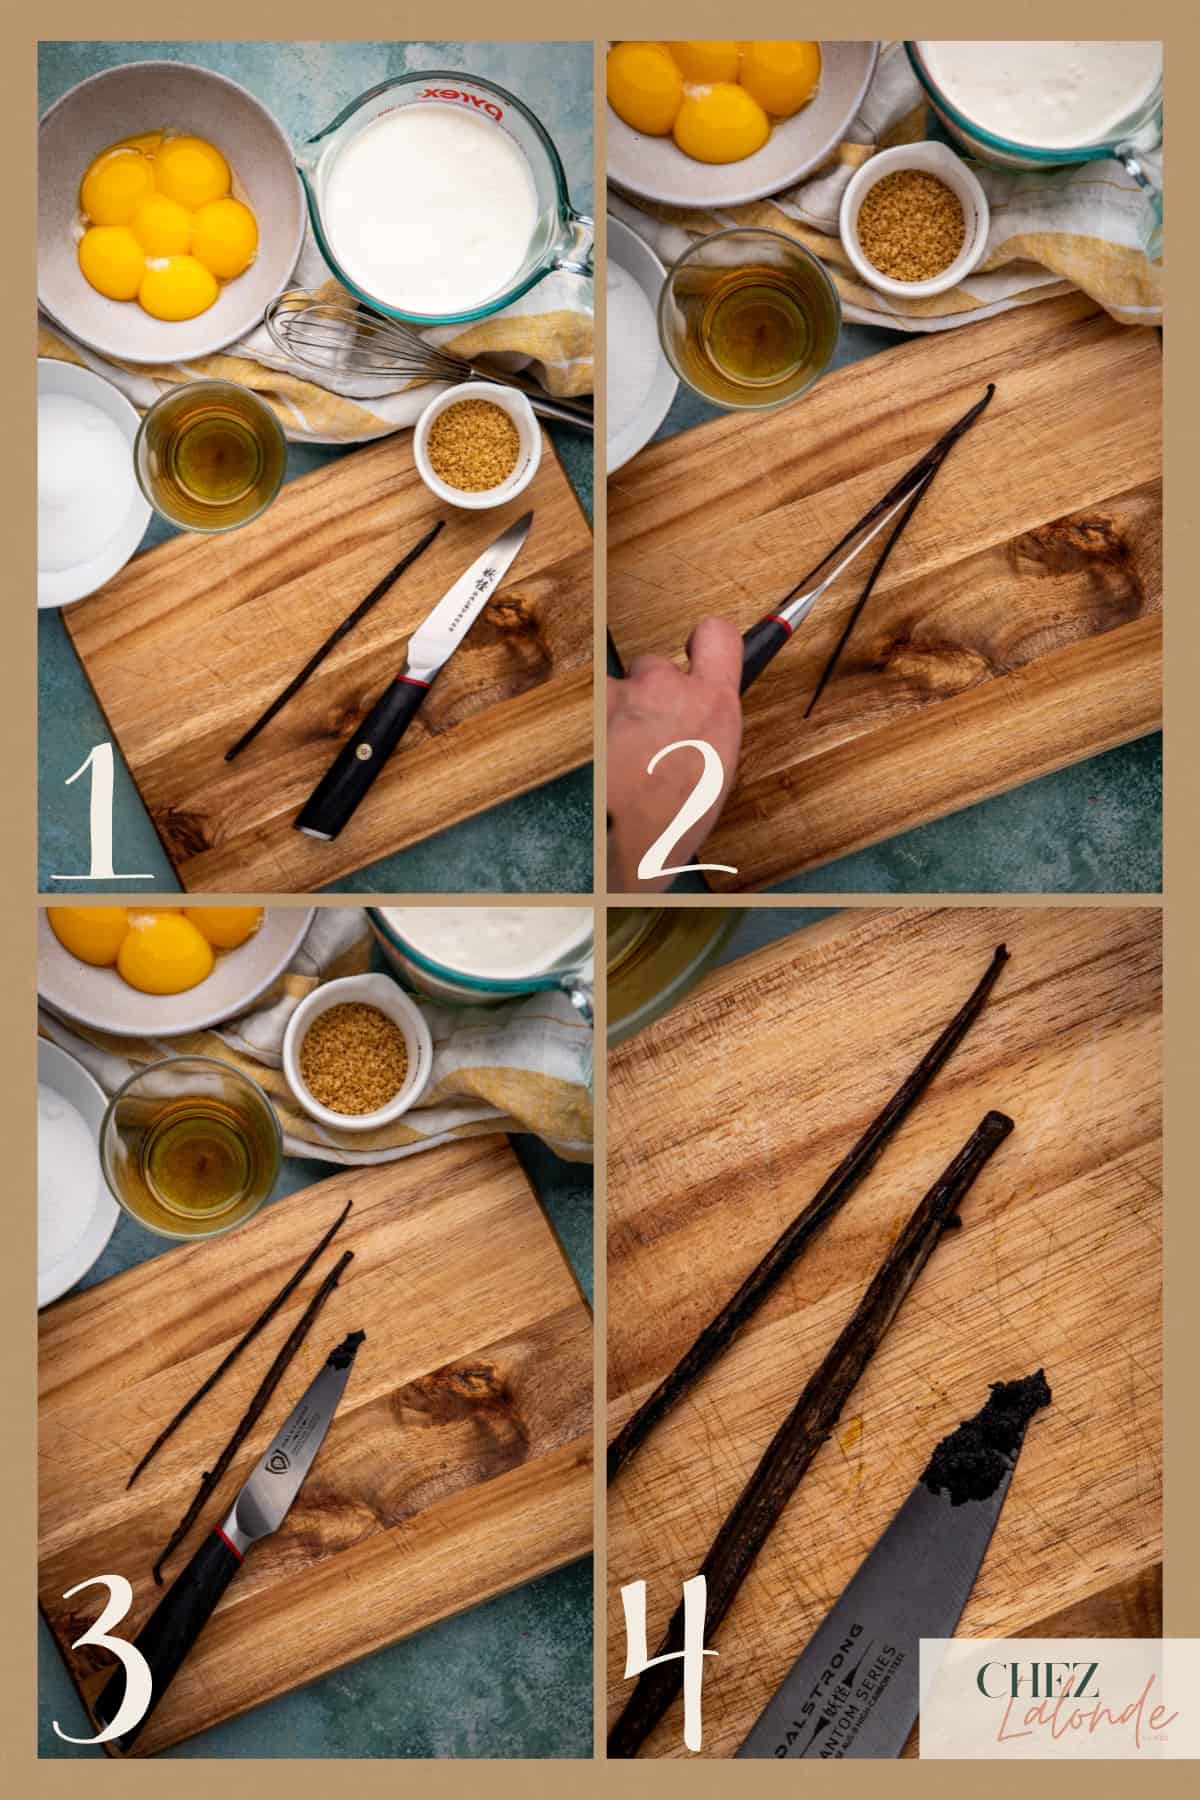 4 steps on how to prepare vanilla beans. 